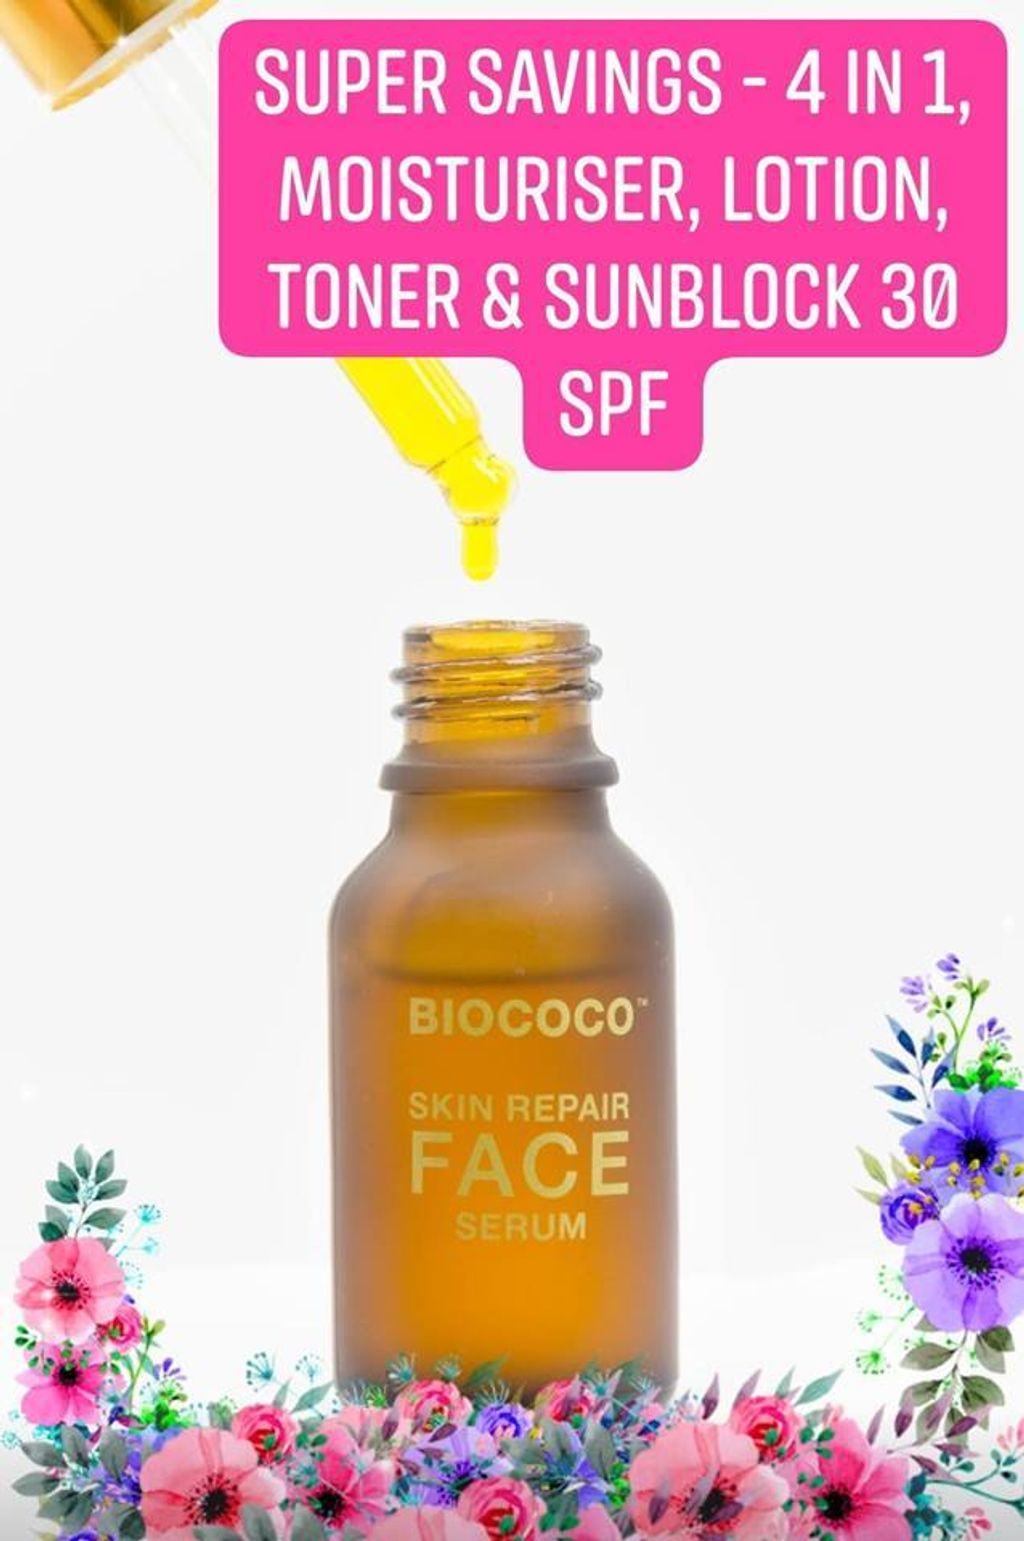 Why BIOCOCO’s 100% Natural Skin Repair Face Serum is already used by customers in Melbourne, Perth, London, Singapore, Tokyo, Bali, Shanghai, Guangzhou, Fujian in the last 12 months.